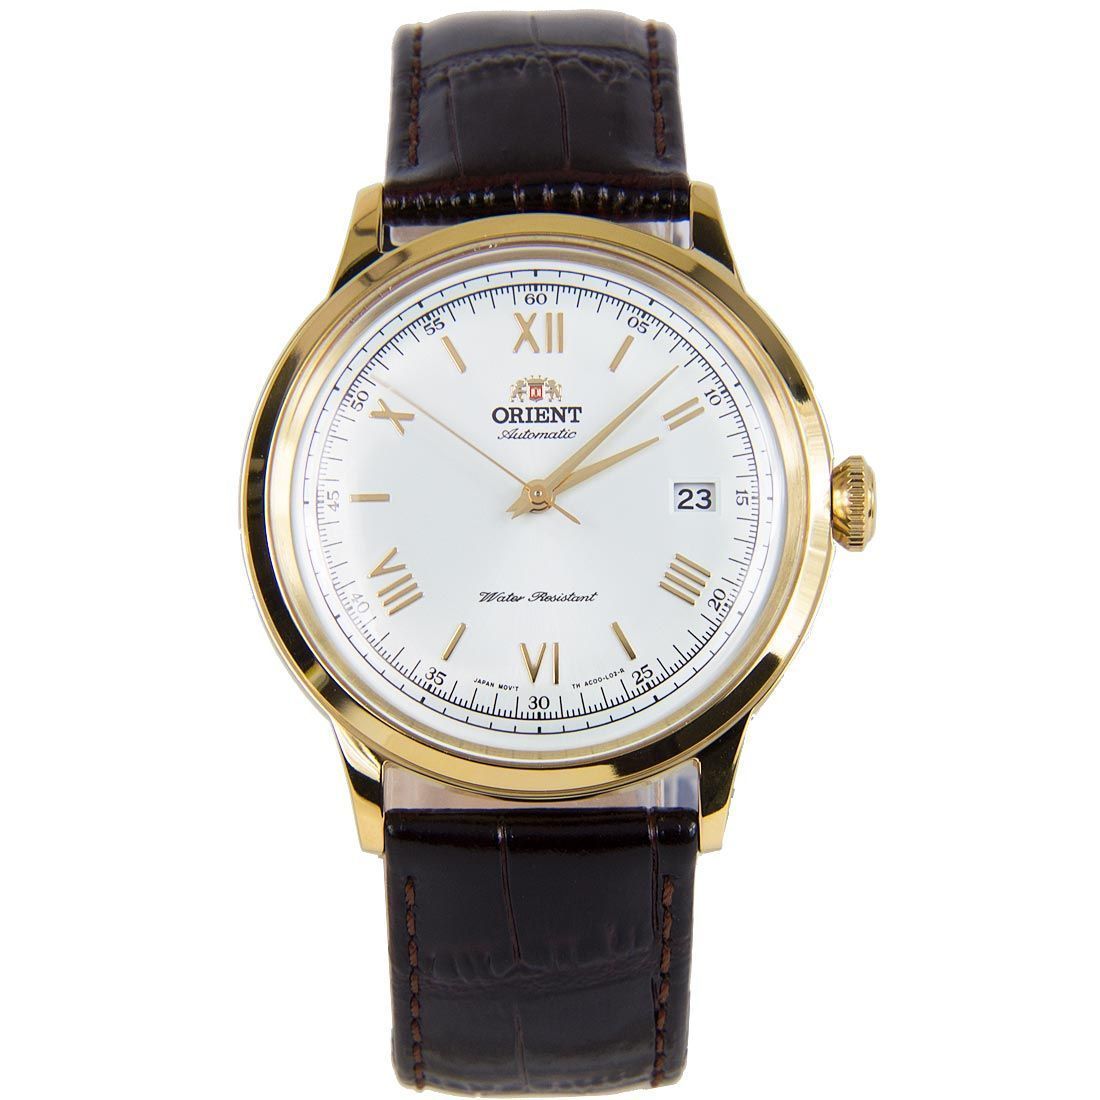 Orient FAC00007W0 AC00007W Bambino Gold Case Leather Band Watch -Orient